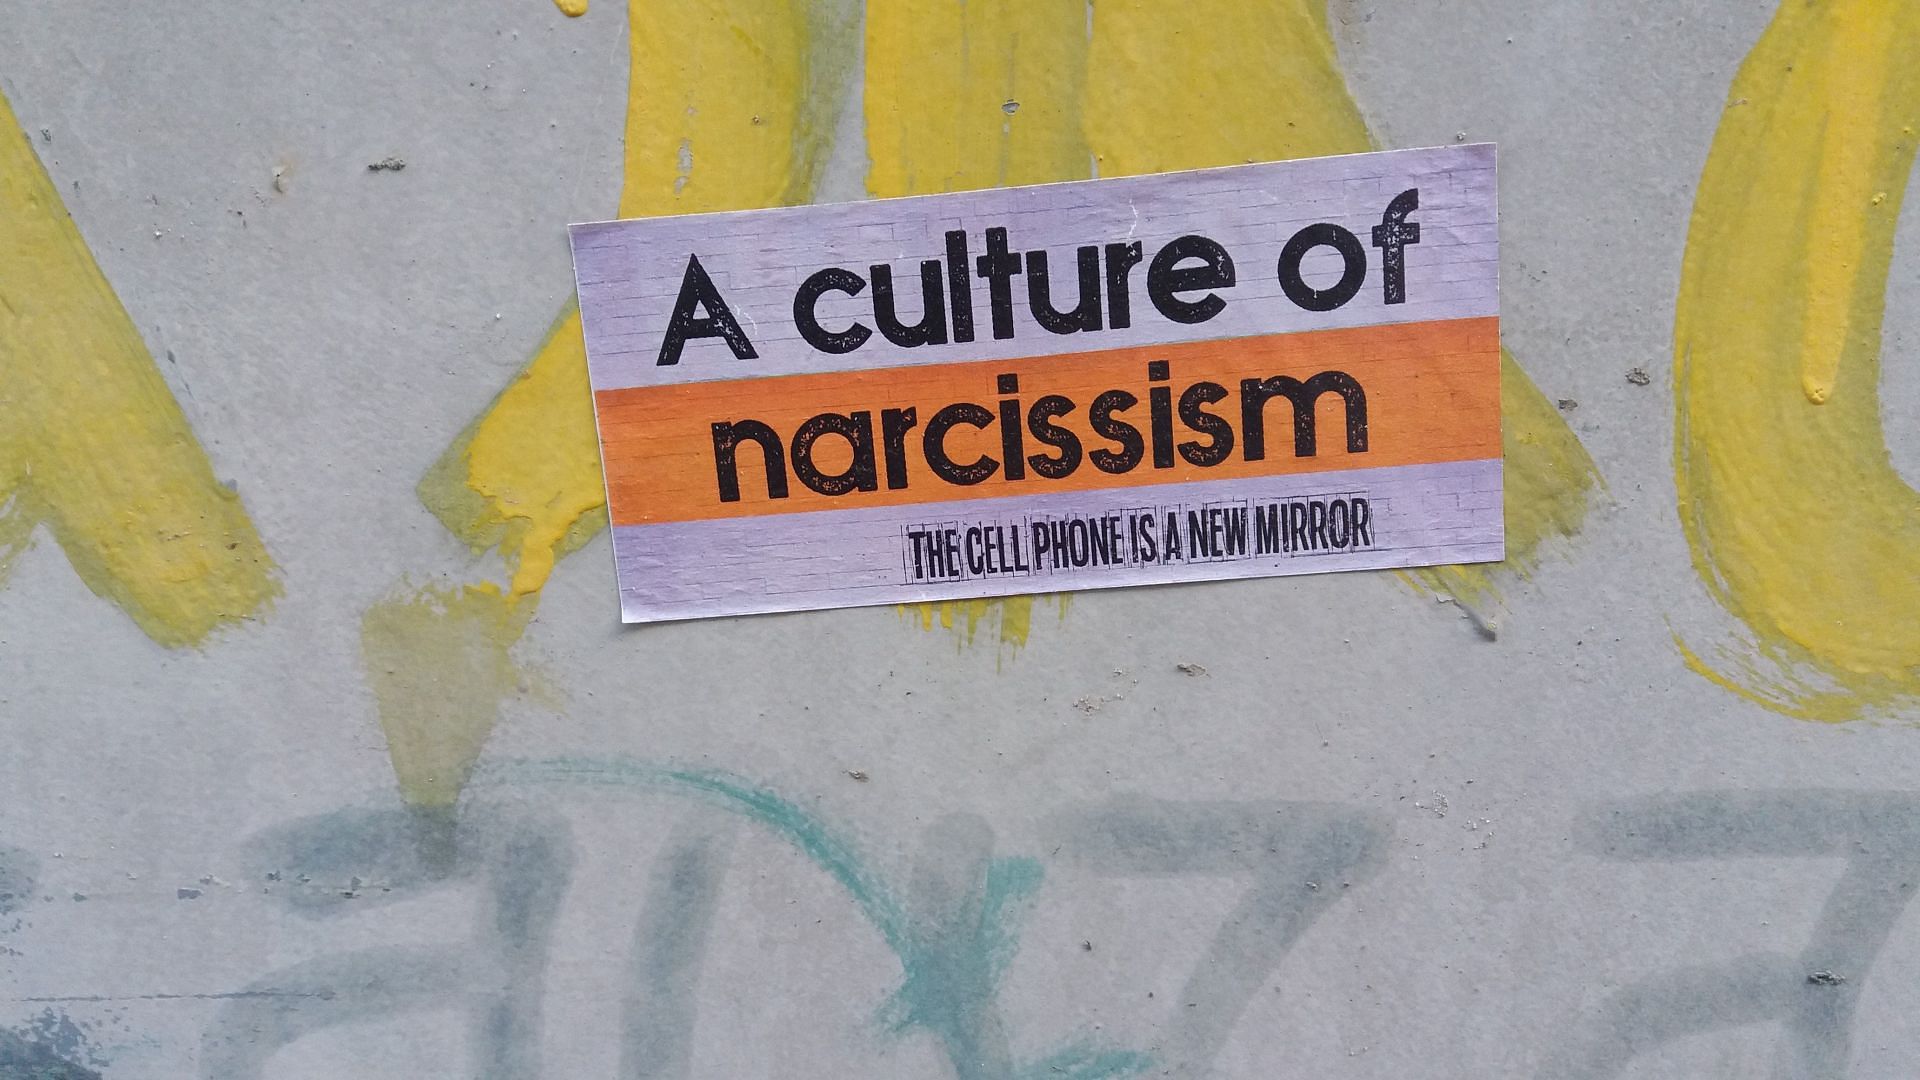 Individuals with narcissism are highly sensitive to criticism. (Image via Unsplash/ Marija)